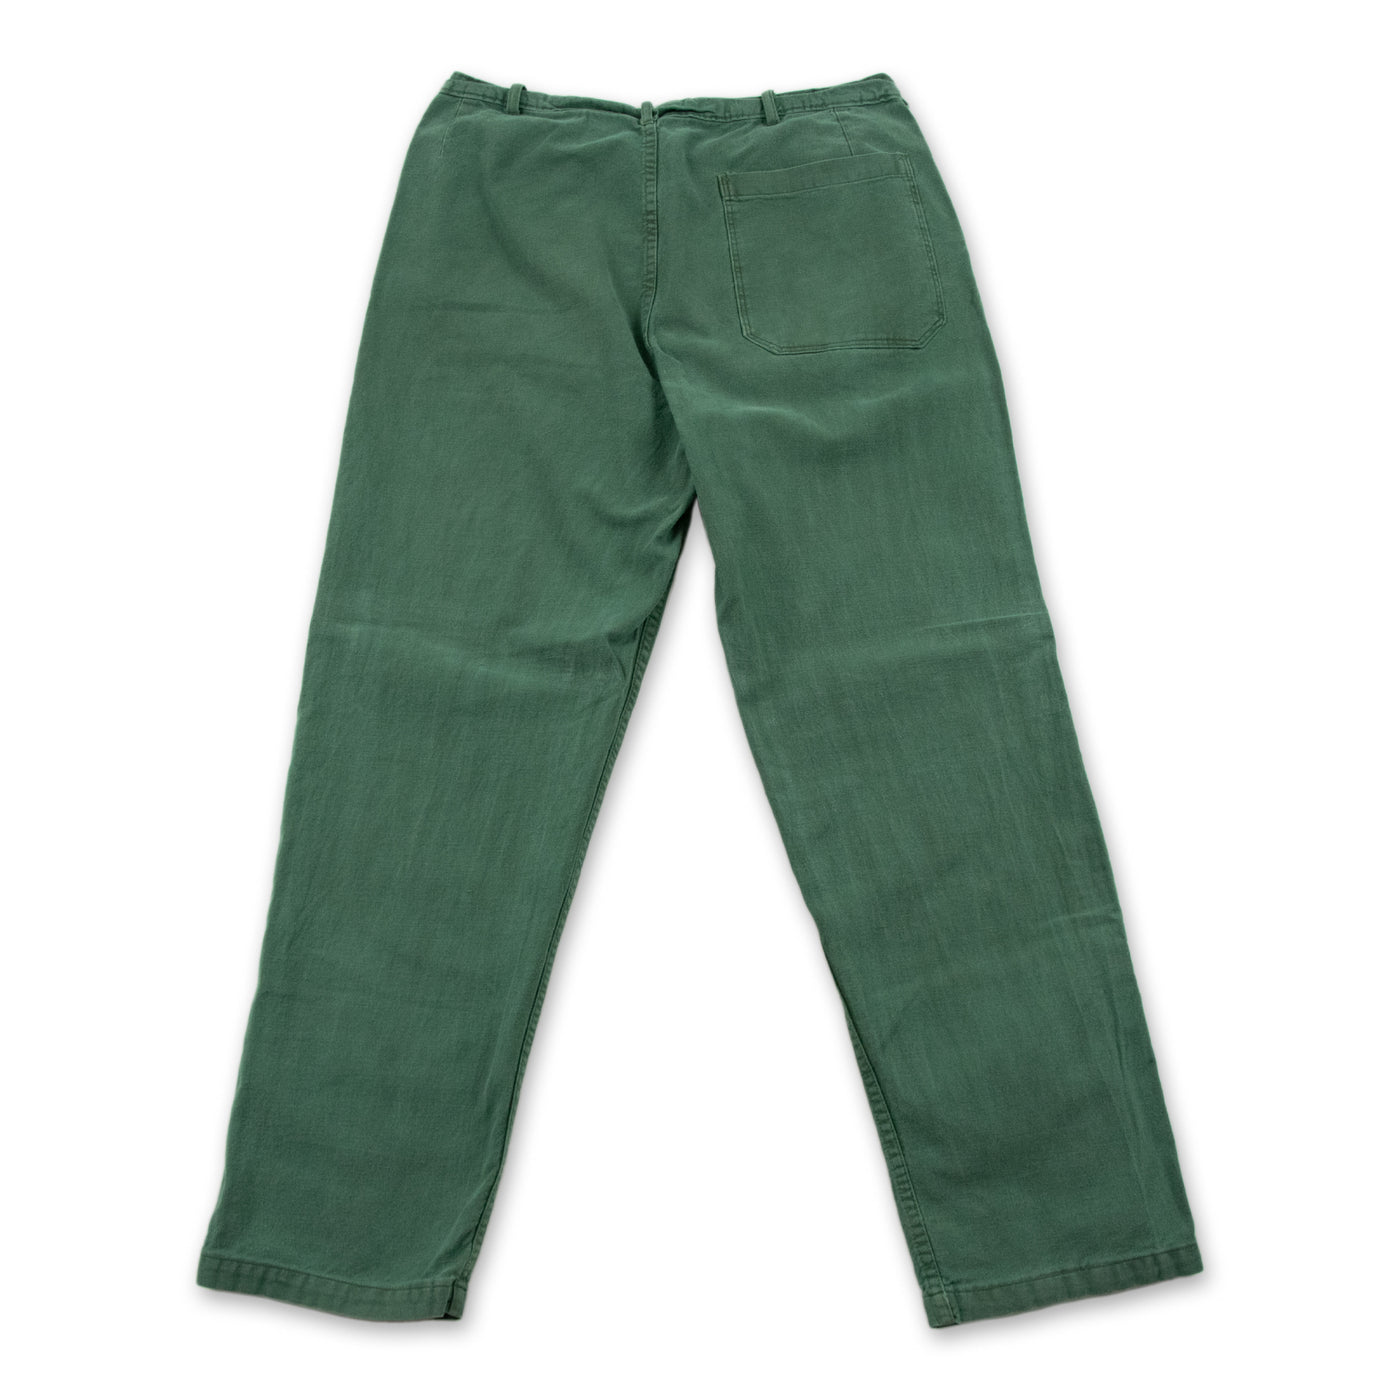 Vintage 70s Swedish Military Field Trousers Worker Style Green 32 W BACK